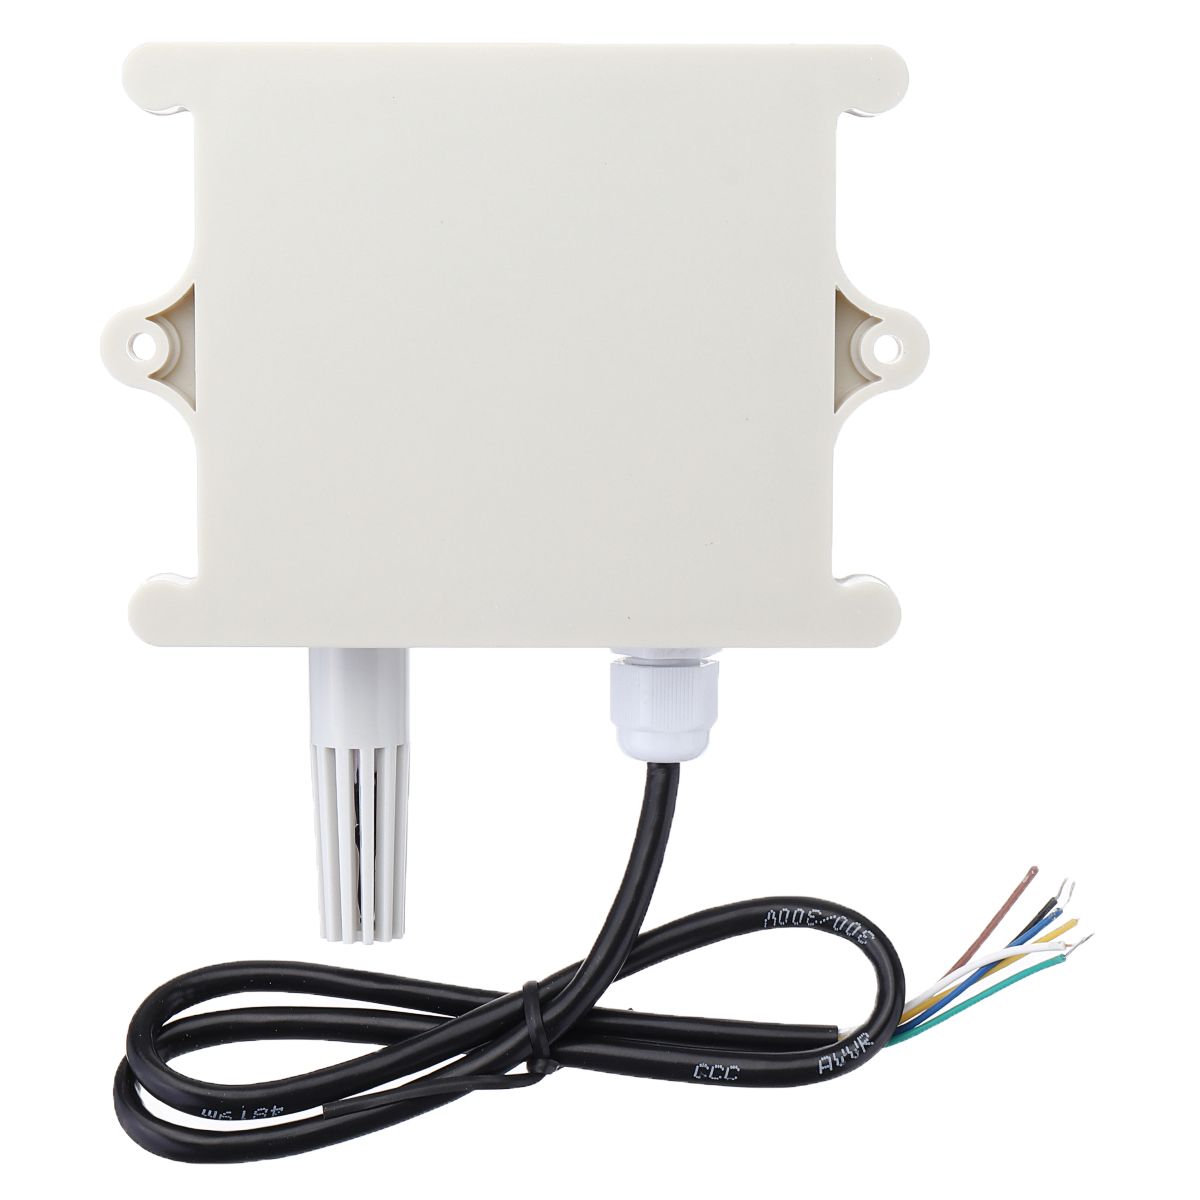 High-precision-Temperature-and-Humidity-Transmitter-4-20mA-Analog-Temperature-and-Humidity-Sensor-Mo-1601368